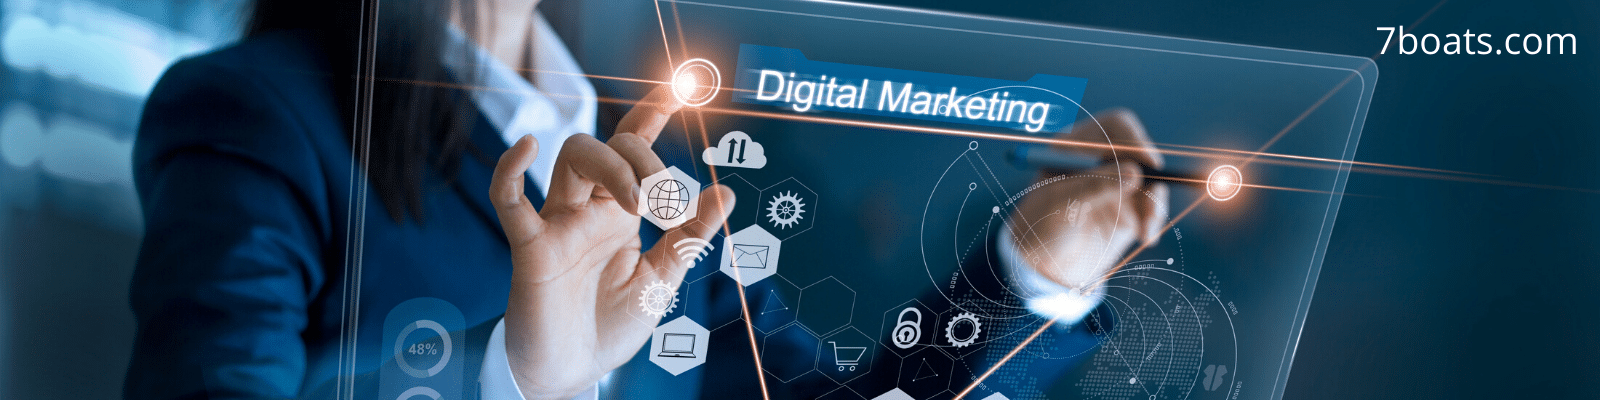 Why digital marketing is the future of marketing